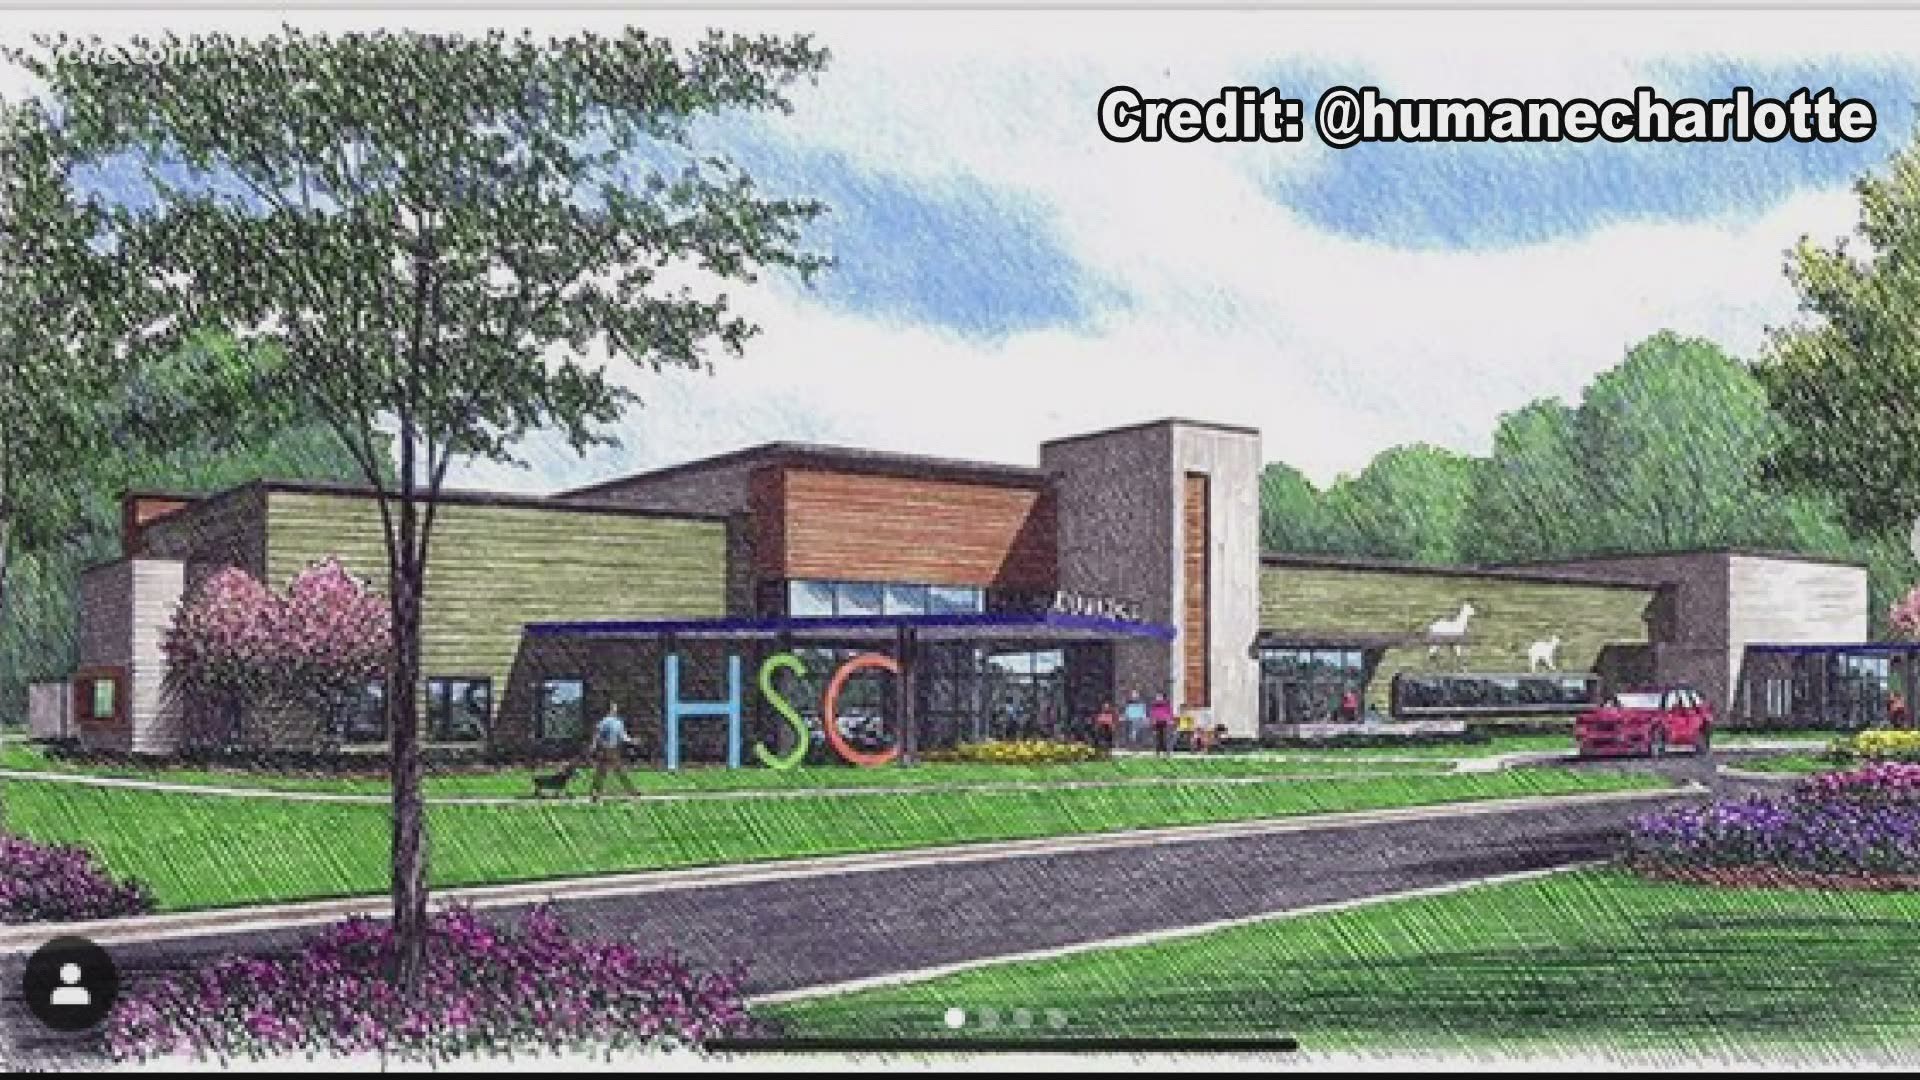 The Humane Society of Charlotte has released new renderings of an animal resource center, but they need the public's help to make it a reality.